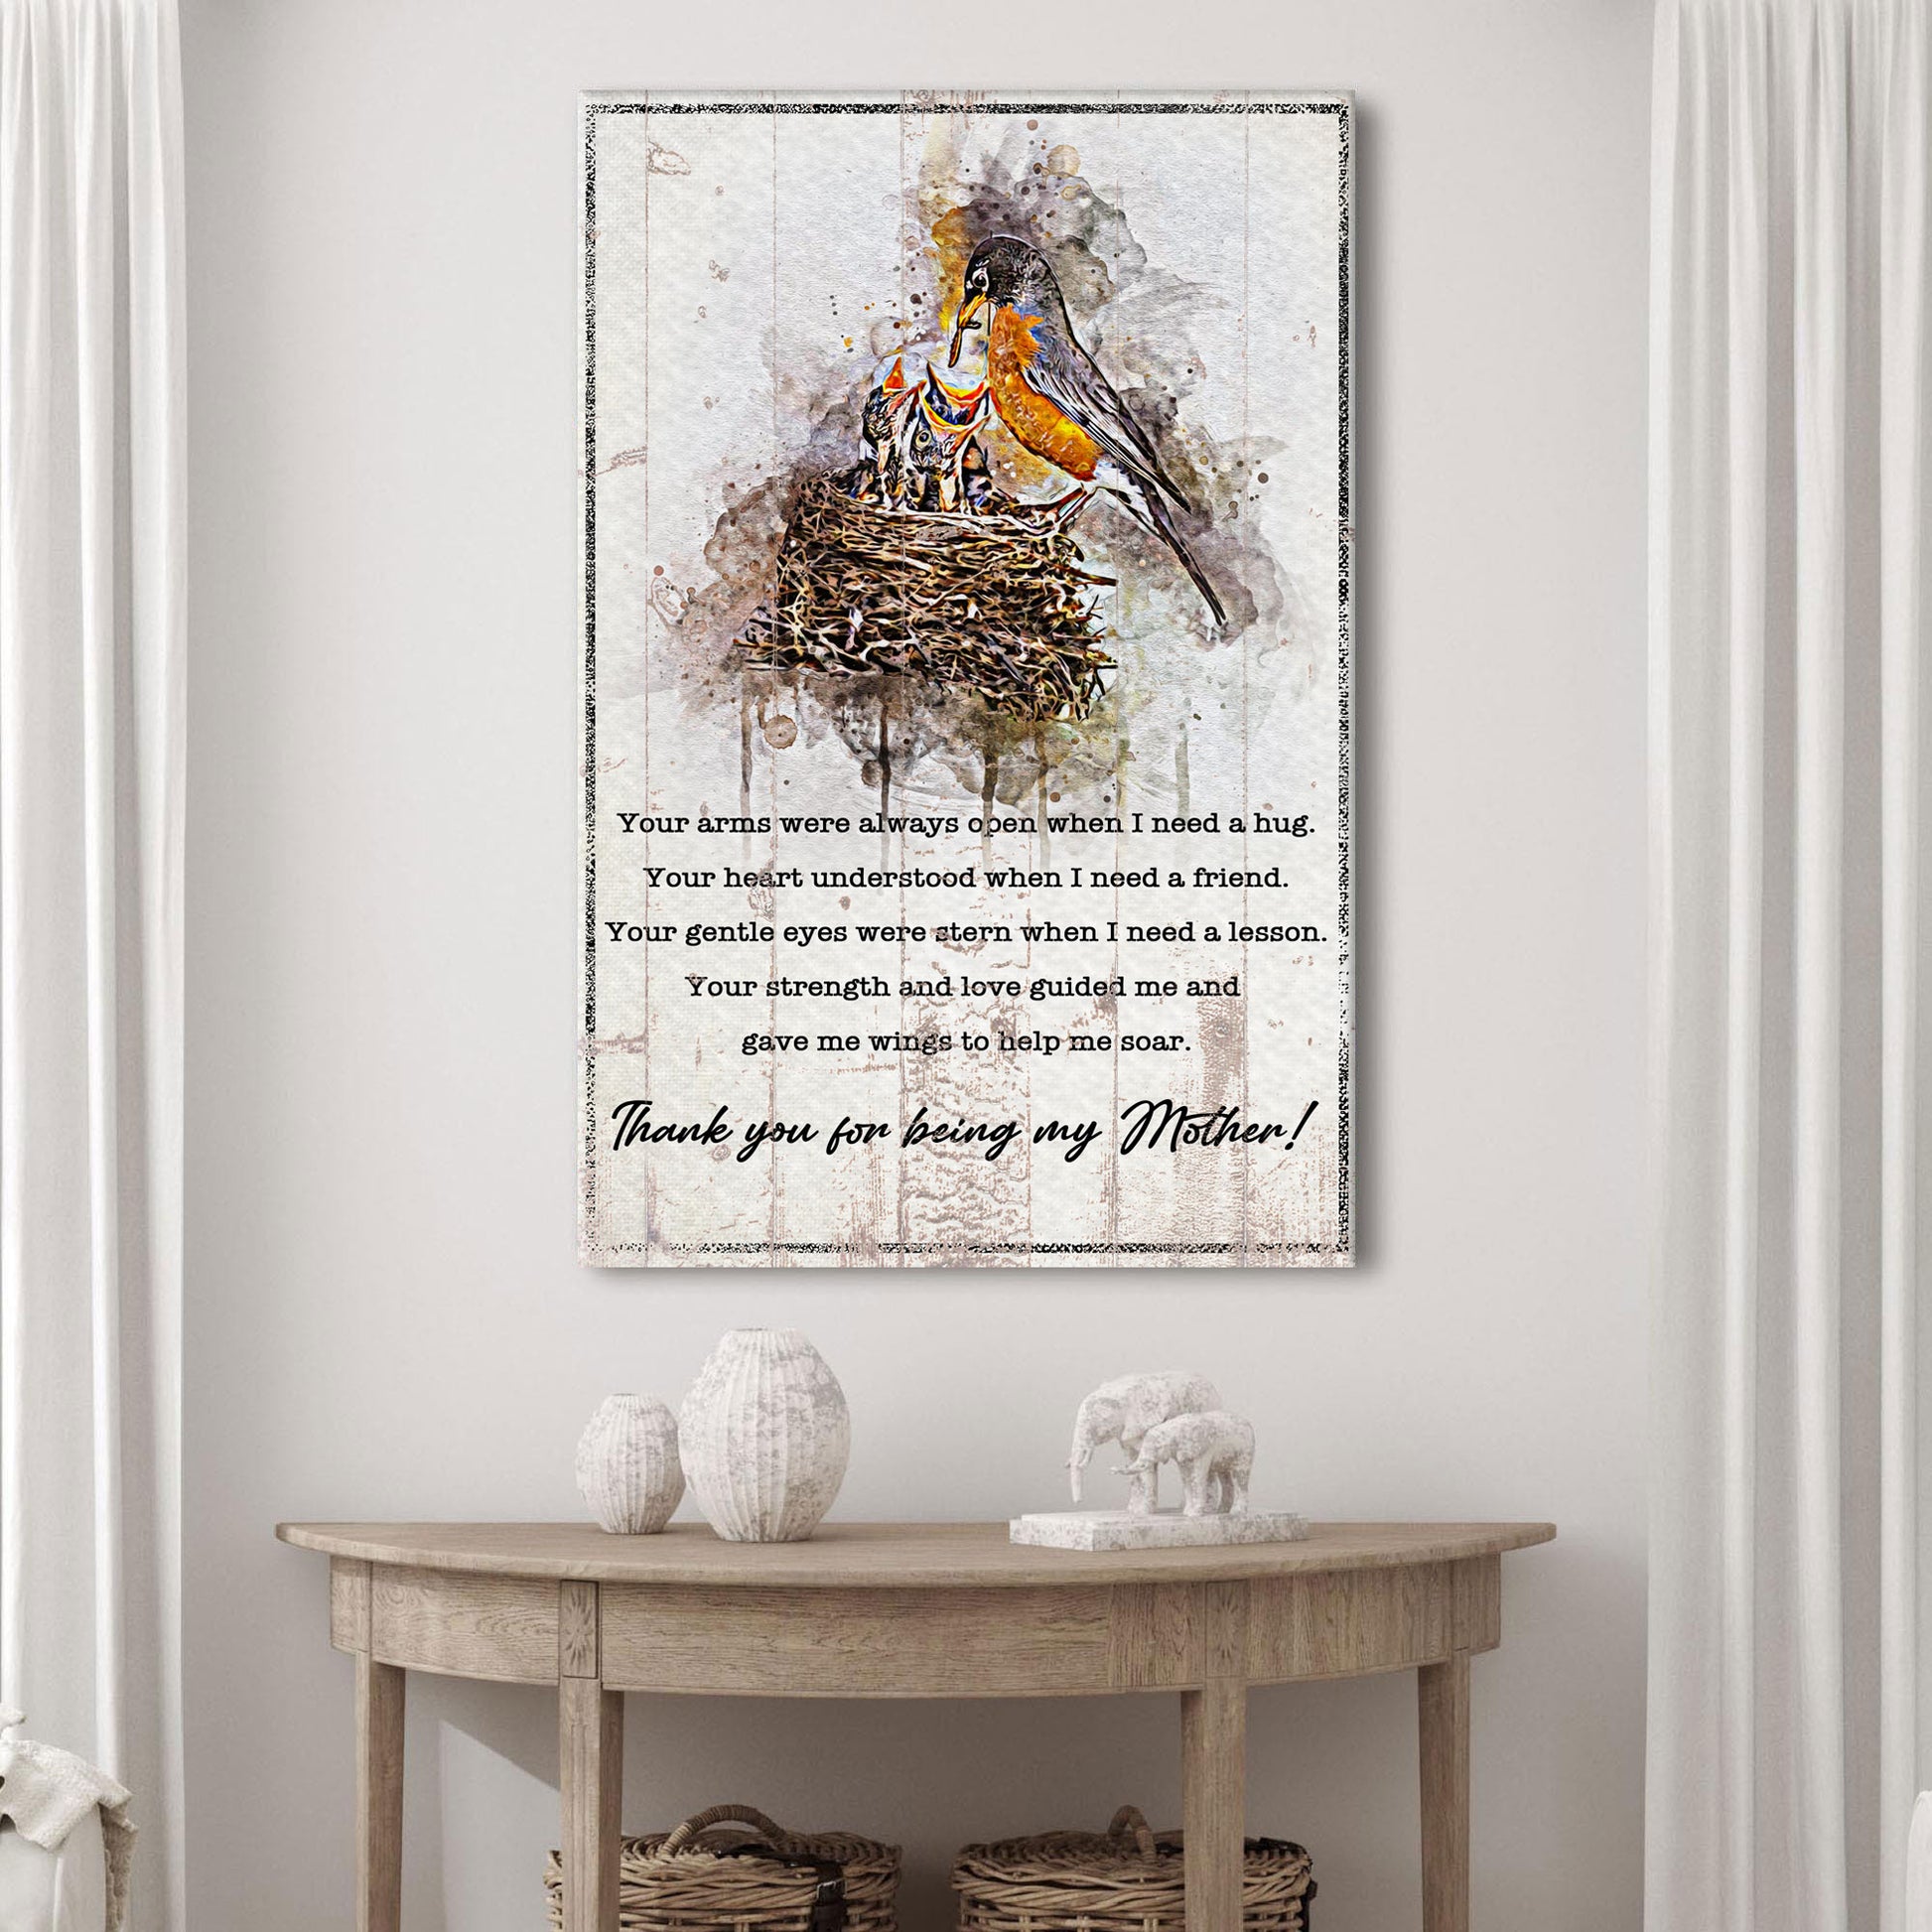 Thank You For Being My Mother Sign Style 2 - Image by Tailored Canvases